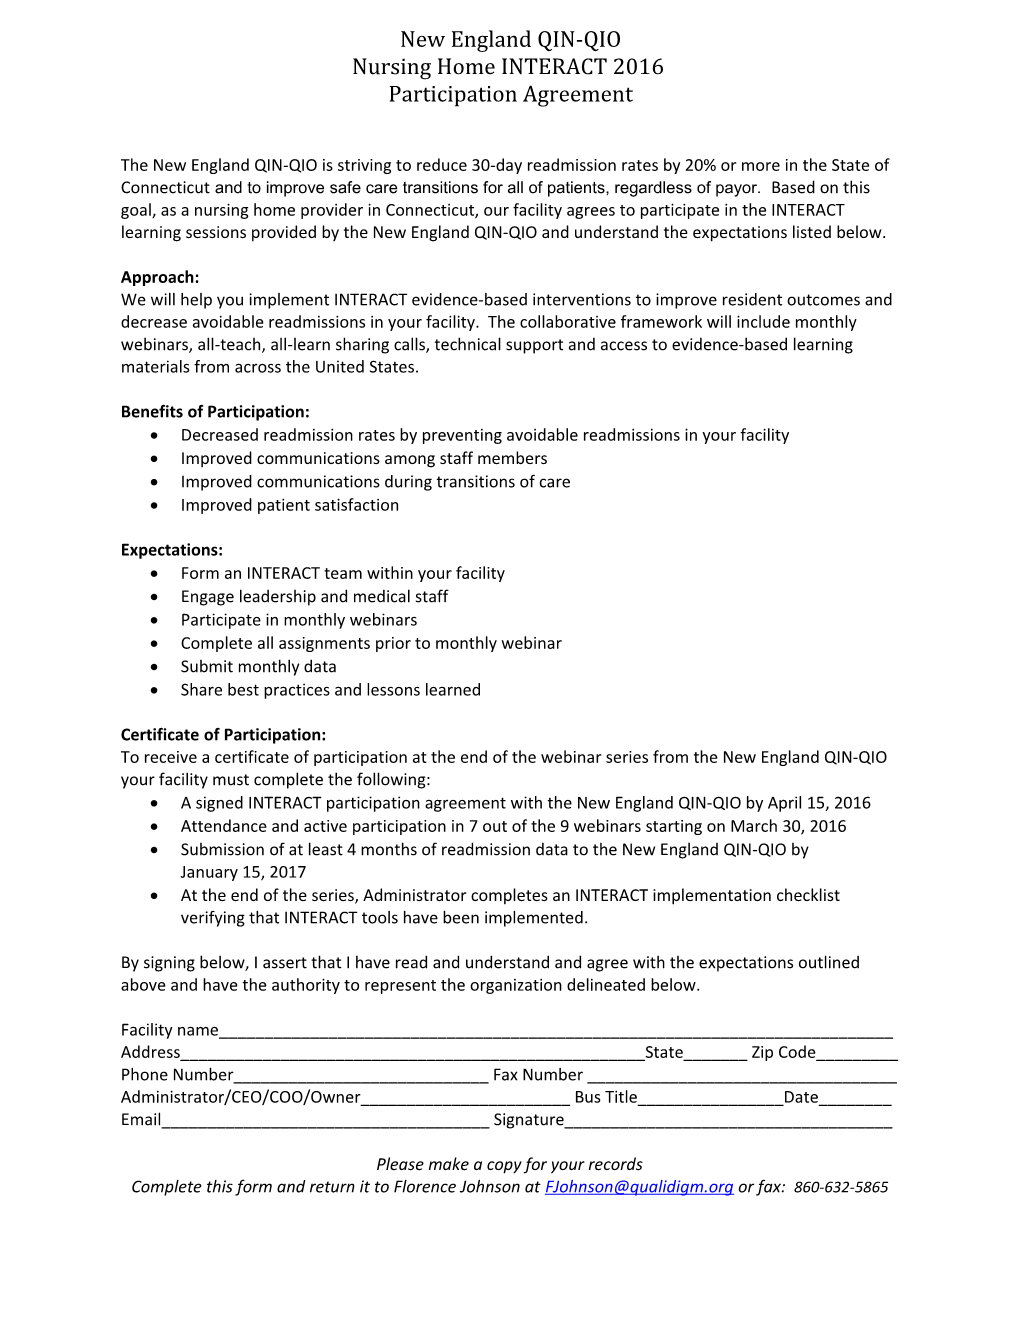 New England QIN-QIO Nursing Home INTERACT 2016 Participation Agreement